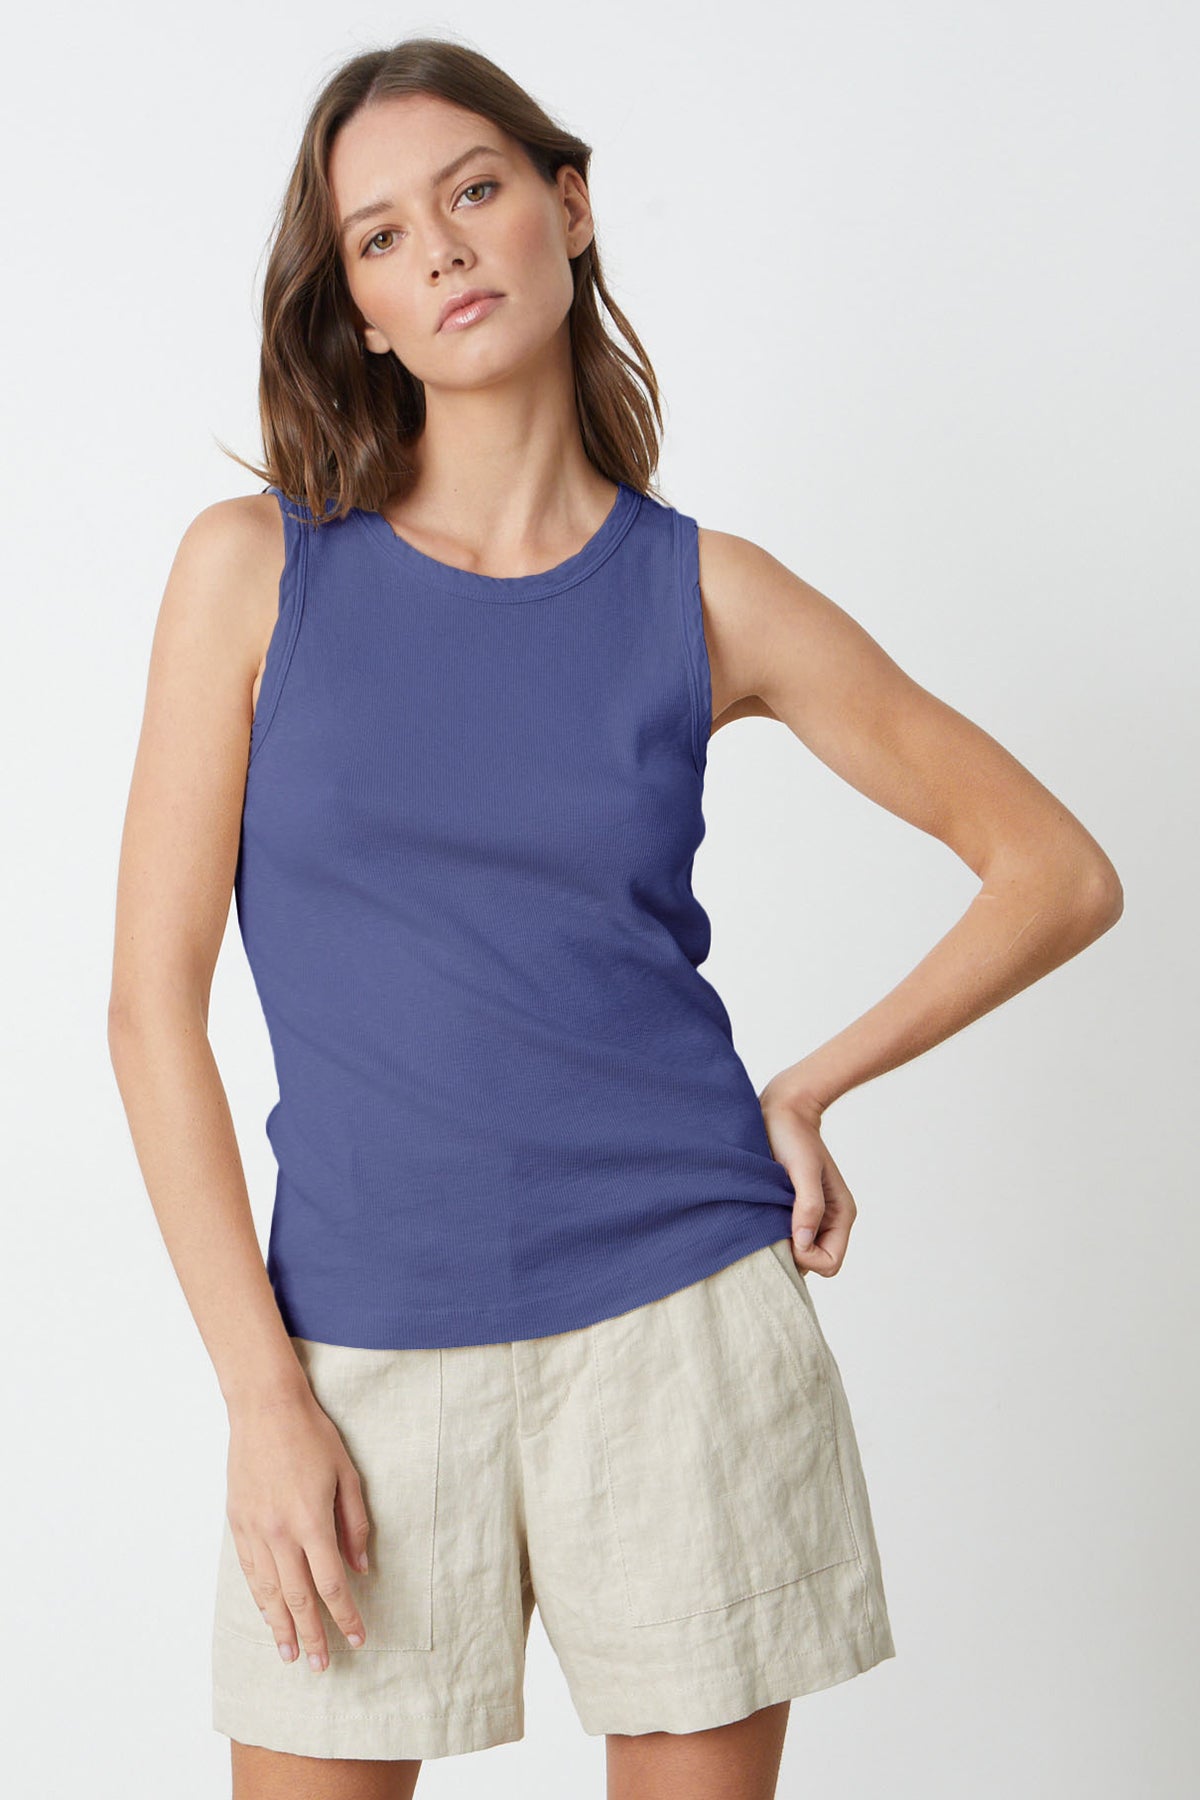 a woman wearing a Velvet by Graham & Spencer MAXIE RIBBED TANK TOP in cavern blue and tan shorts.-35206385860801